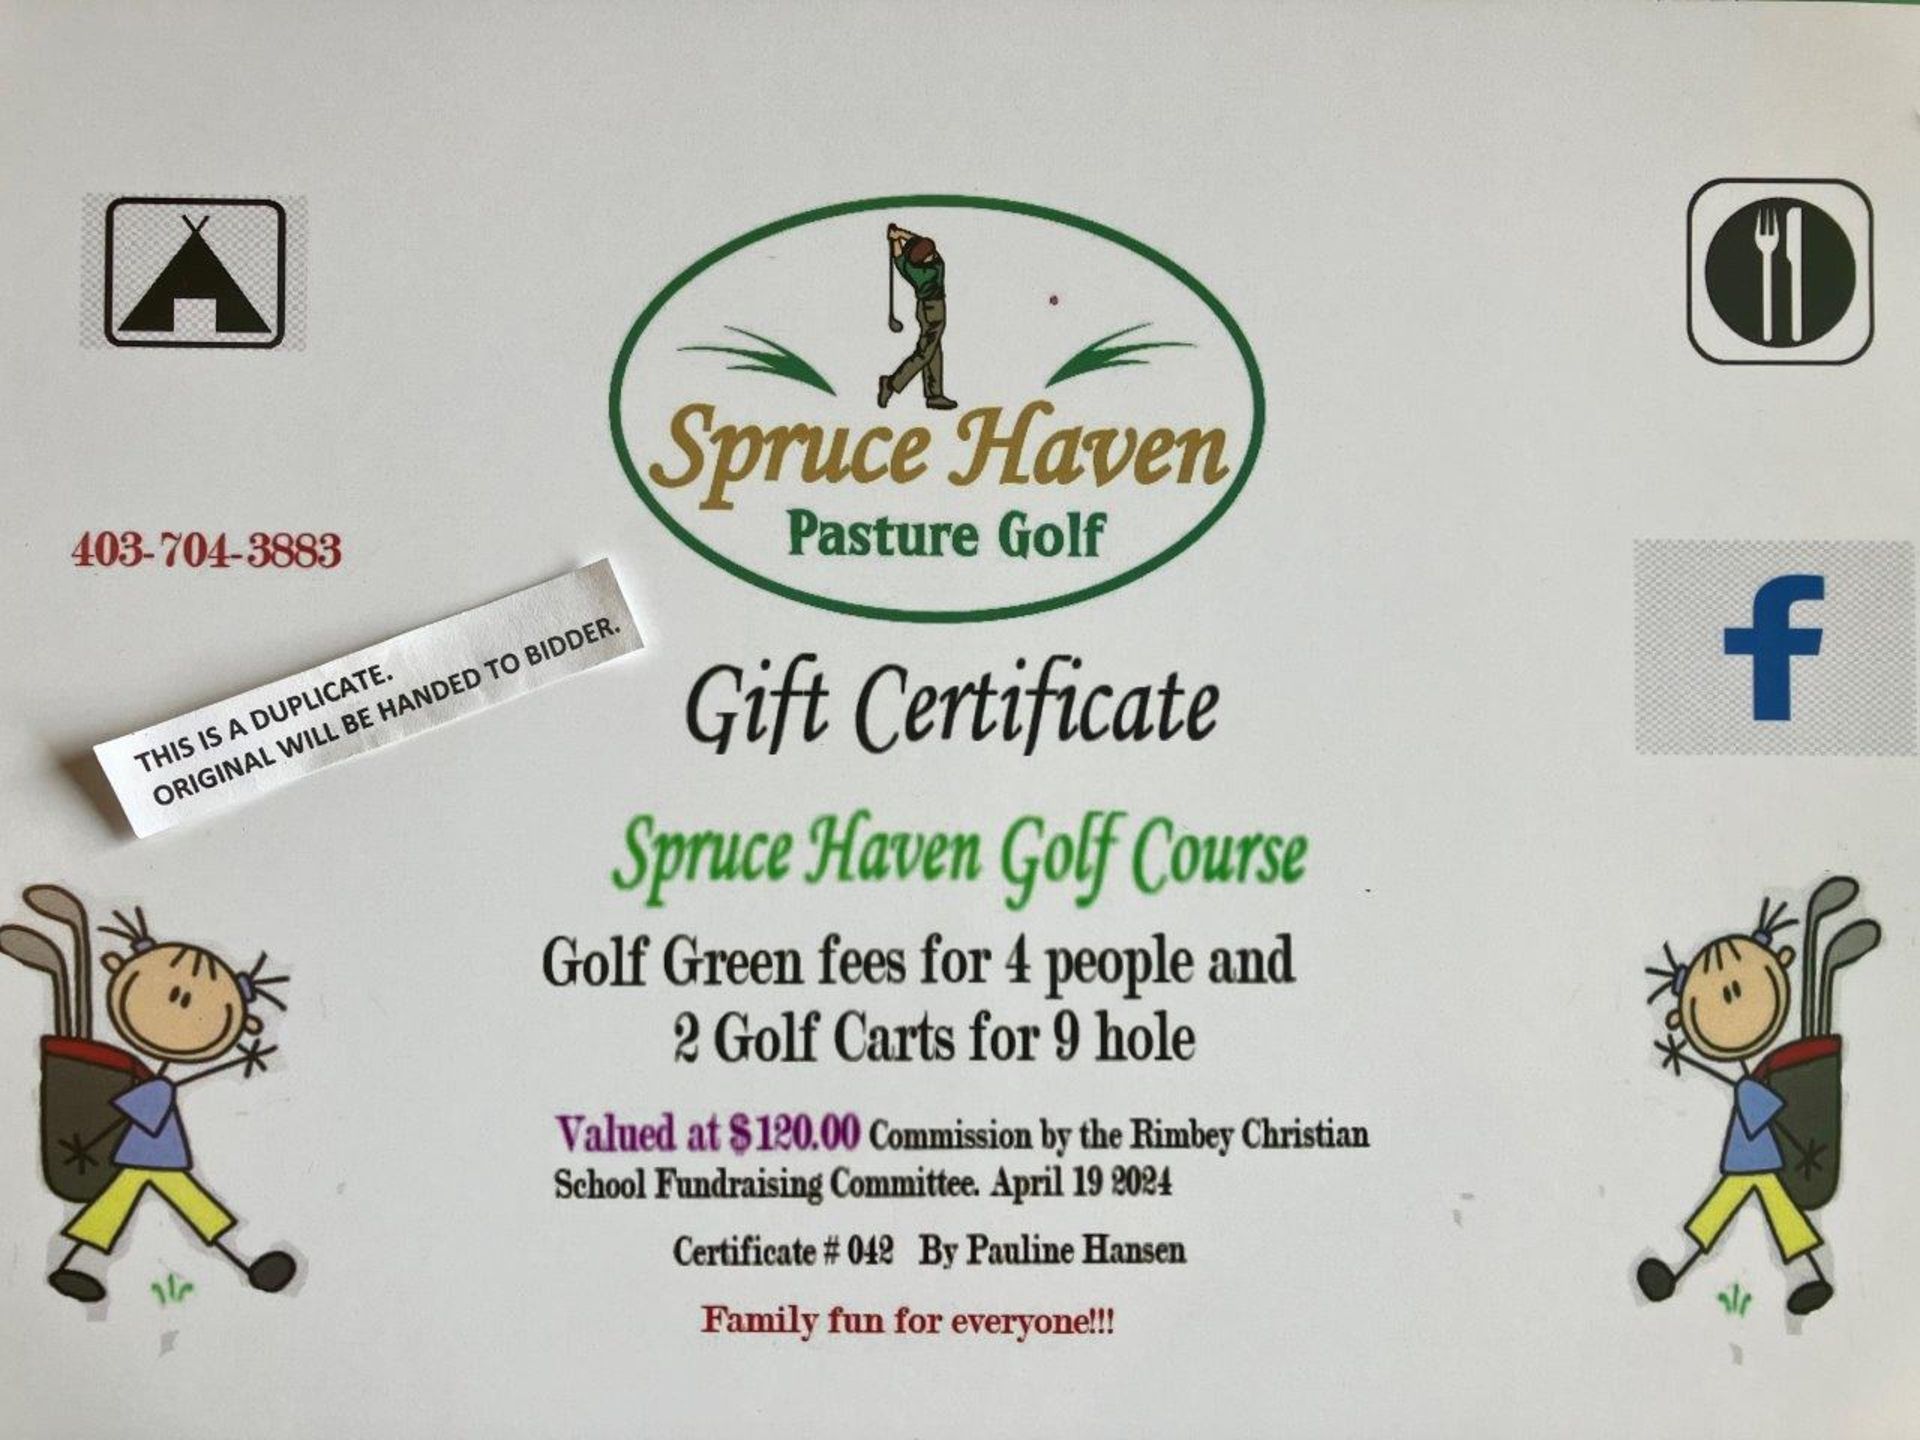 SPRUCE HAVEN PASTURE GOLF COURSE GIFT CERTIFICATE - Image 2 of 2